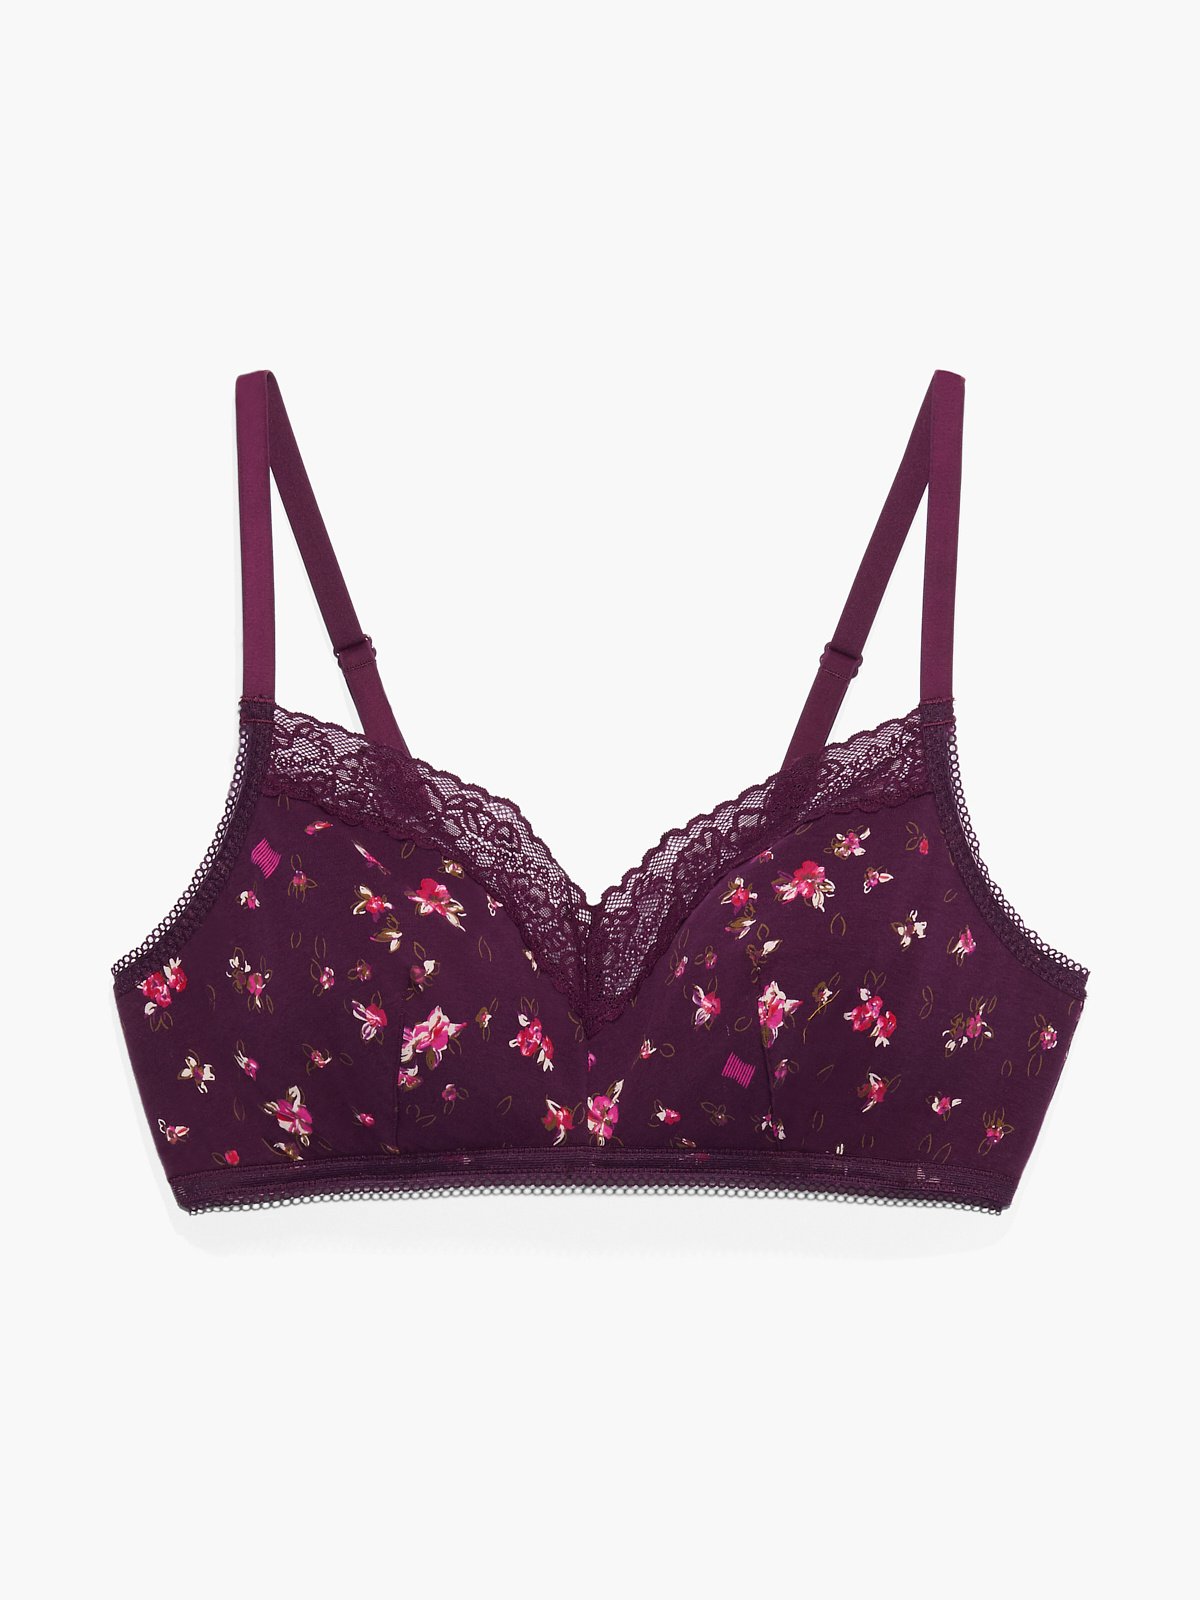 Bralette Comfortable Hot Tops Sexy Lace Bra · clothing · Online Store  Powered by Storenvy